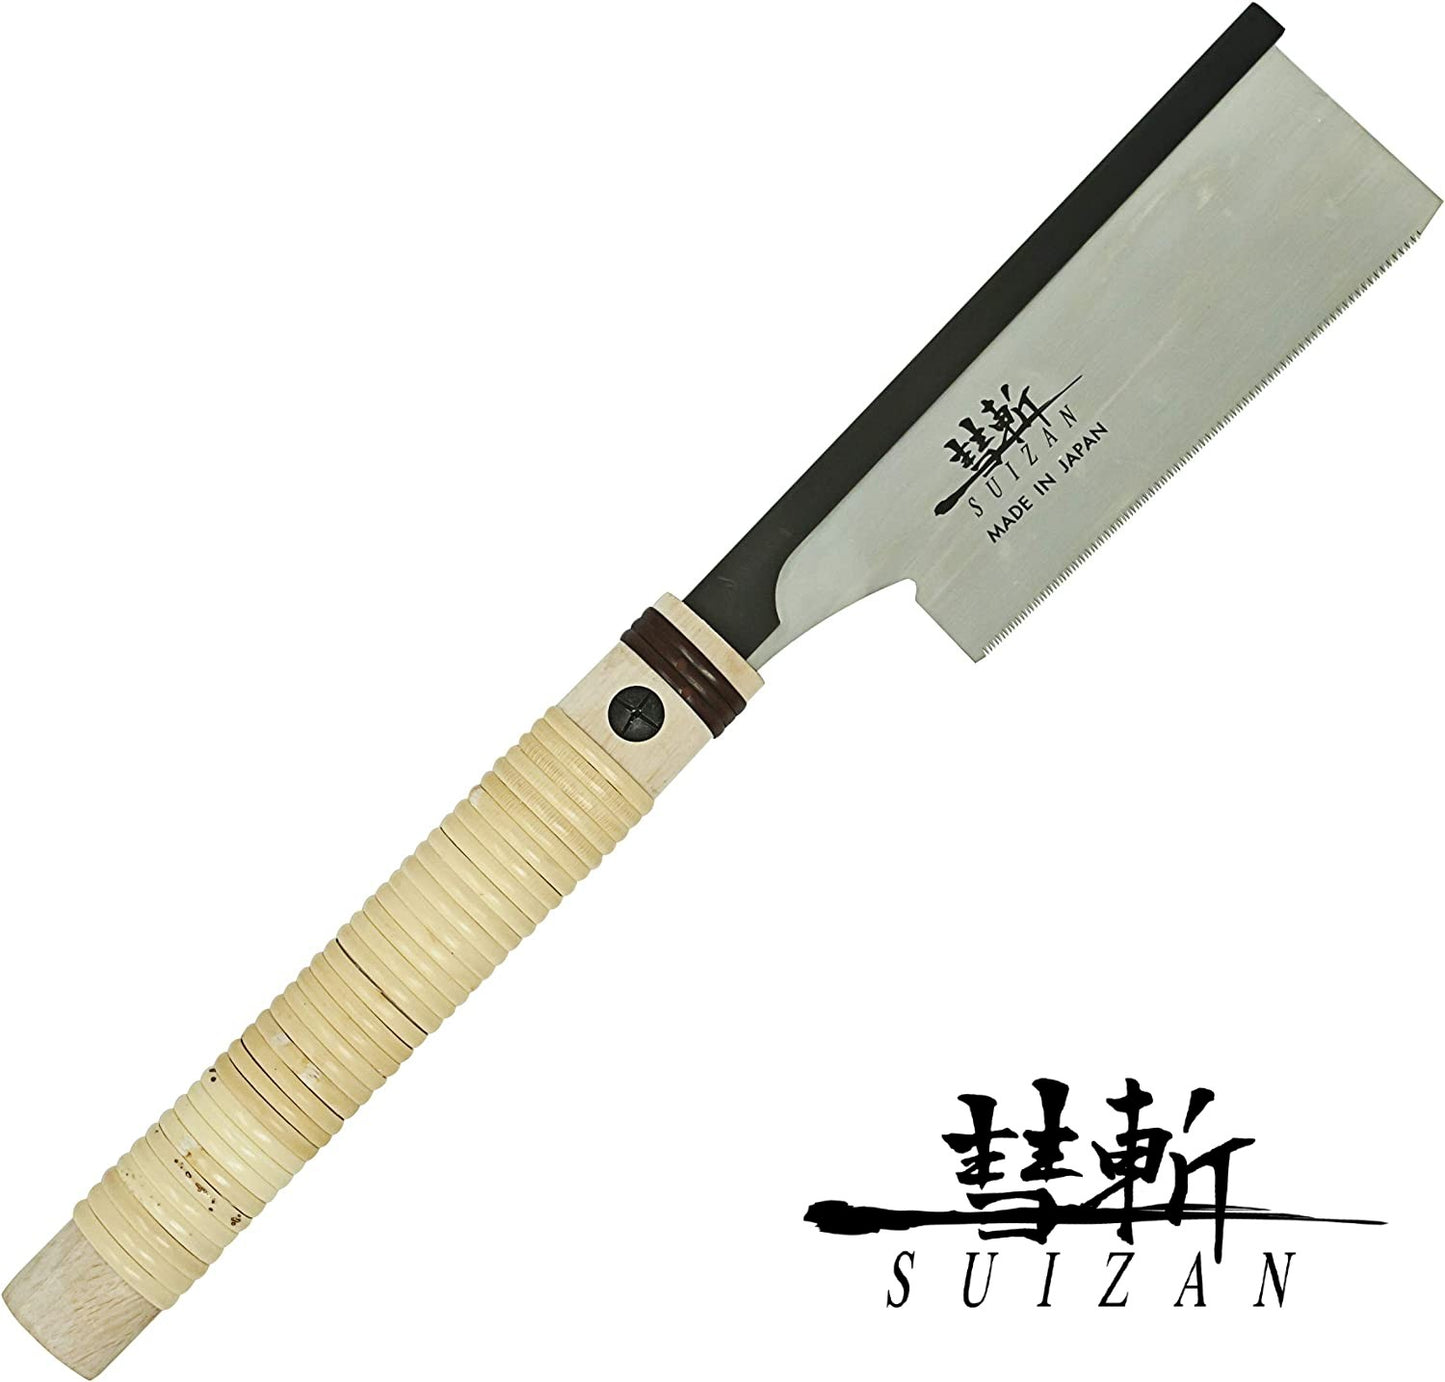 SUIZAN Japanese Hand Saw 6 Inch Dozuki Dovetail Pull Saw for Woodworking